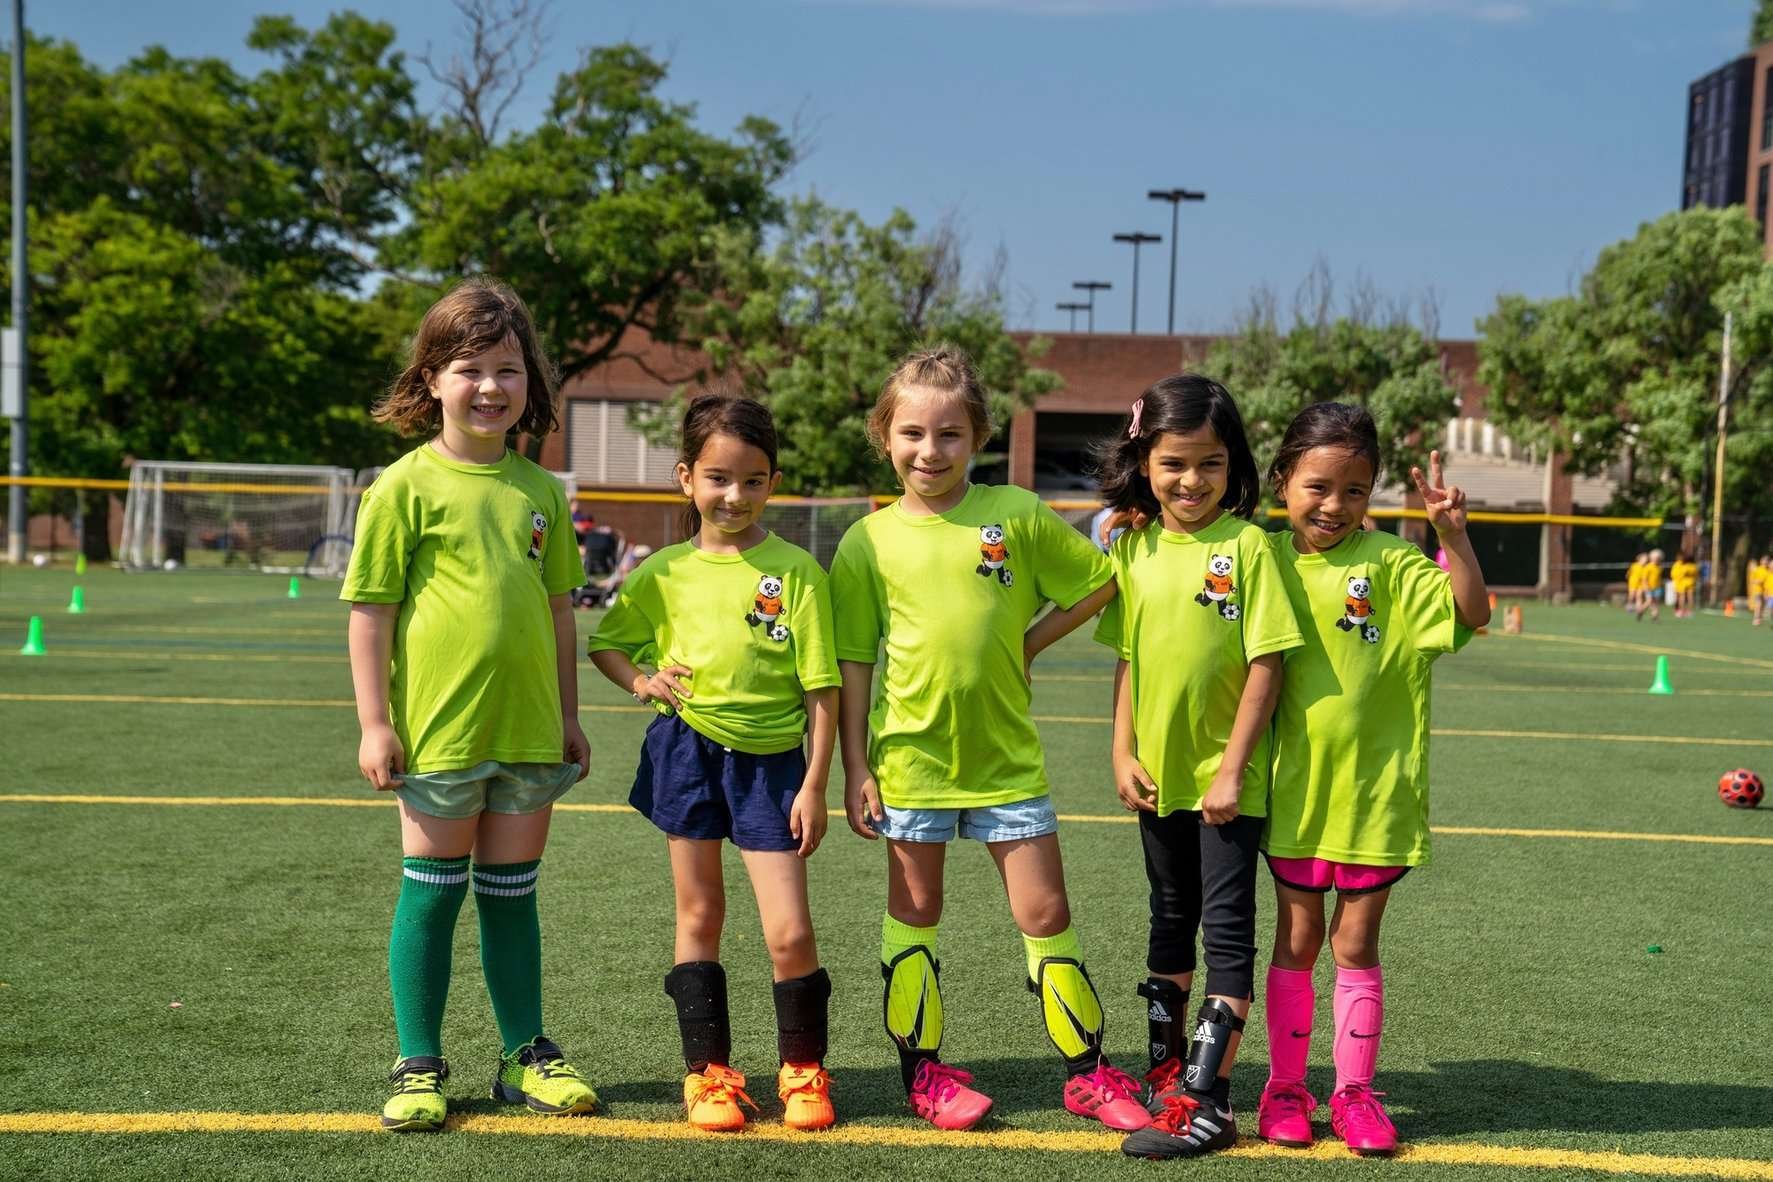 Dc-way-soccer-club-for-kids-in-washington-dc-capitol-hill-league-at-brentwood-hamilton-park-06-03-2023 0012.jpg